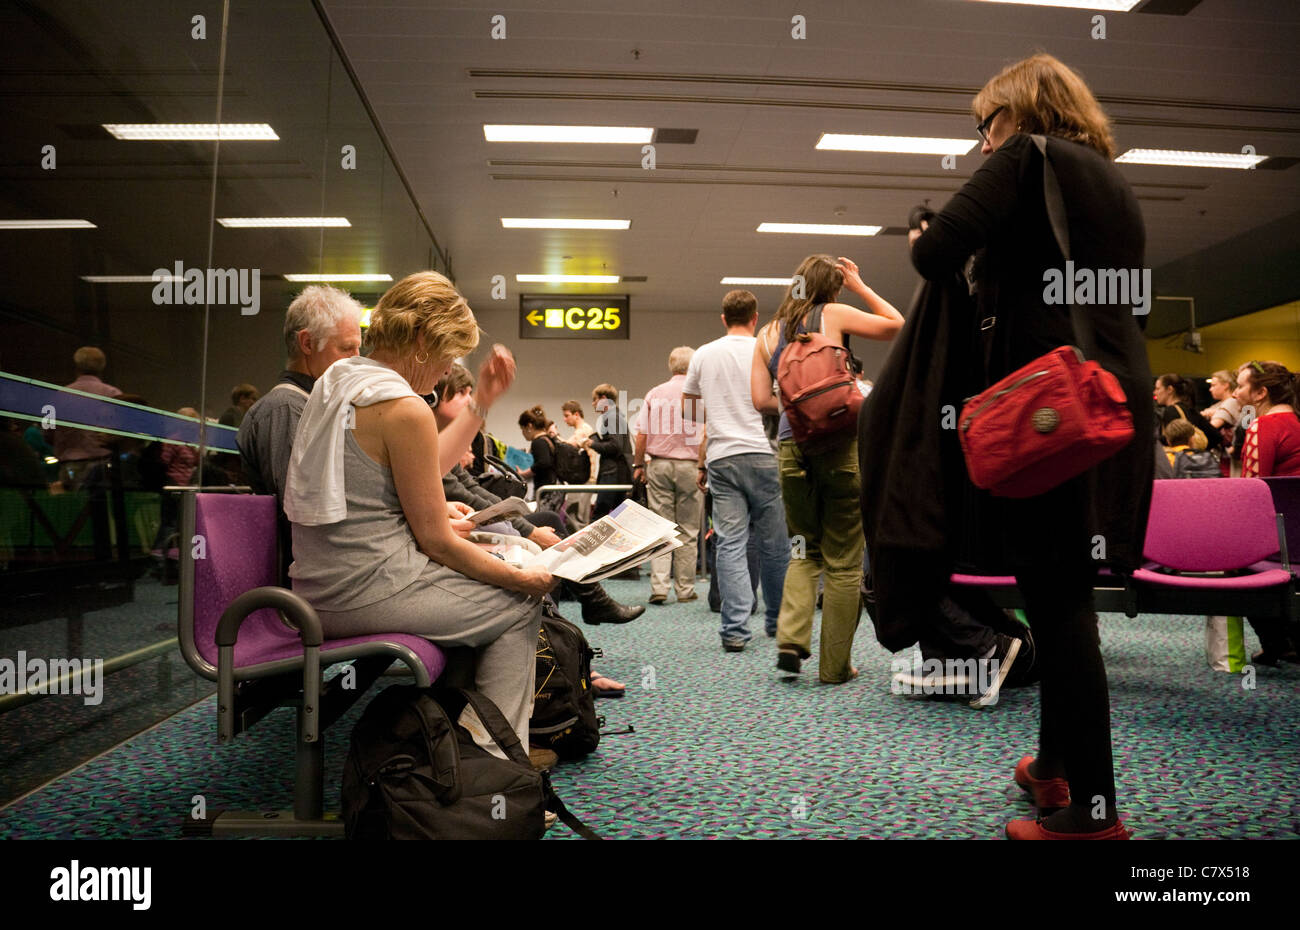 People queuing to board a plane at the gate, Changi airport Singapore Stock Photo